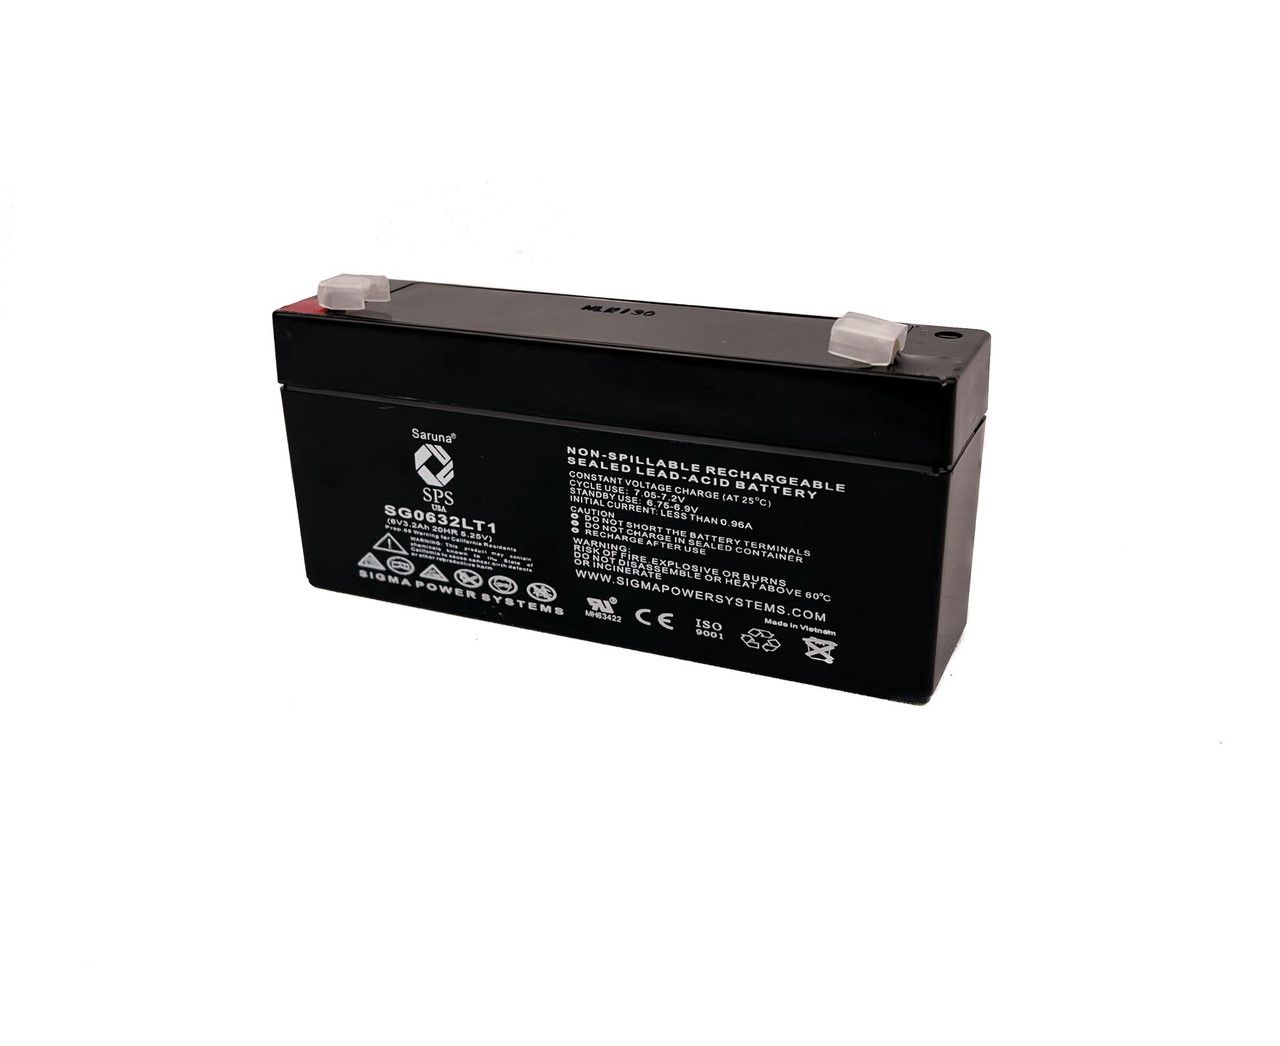 Raion Power RG0632LT1 Replacement UPS Battery for HP P 1504B